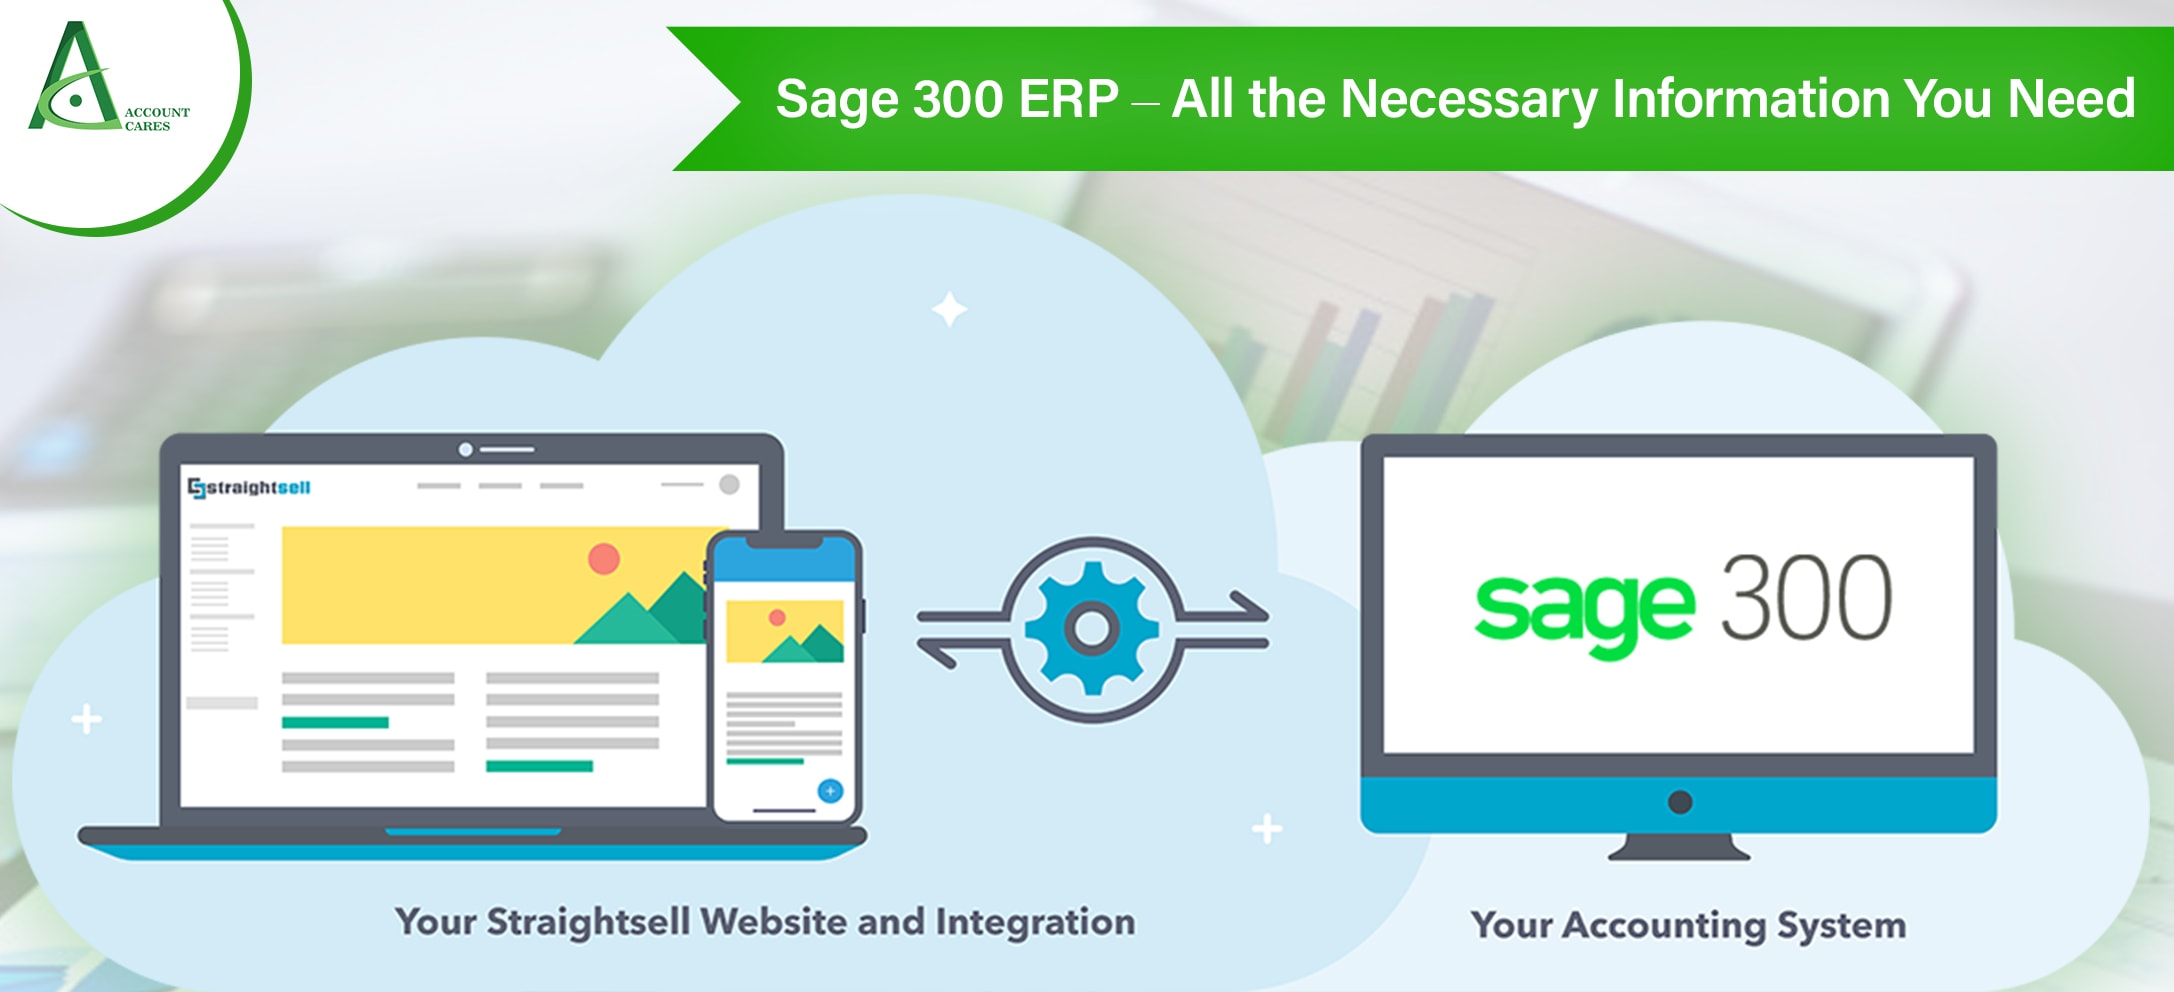 Sage 300 Version 2020.1 Released in India with Additional Modules to Enable SME's Automate and Tighten Business Processes